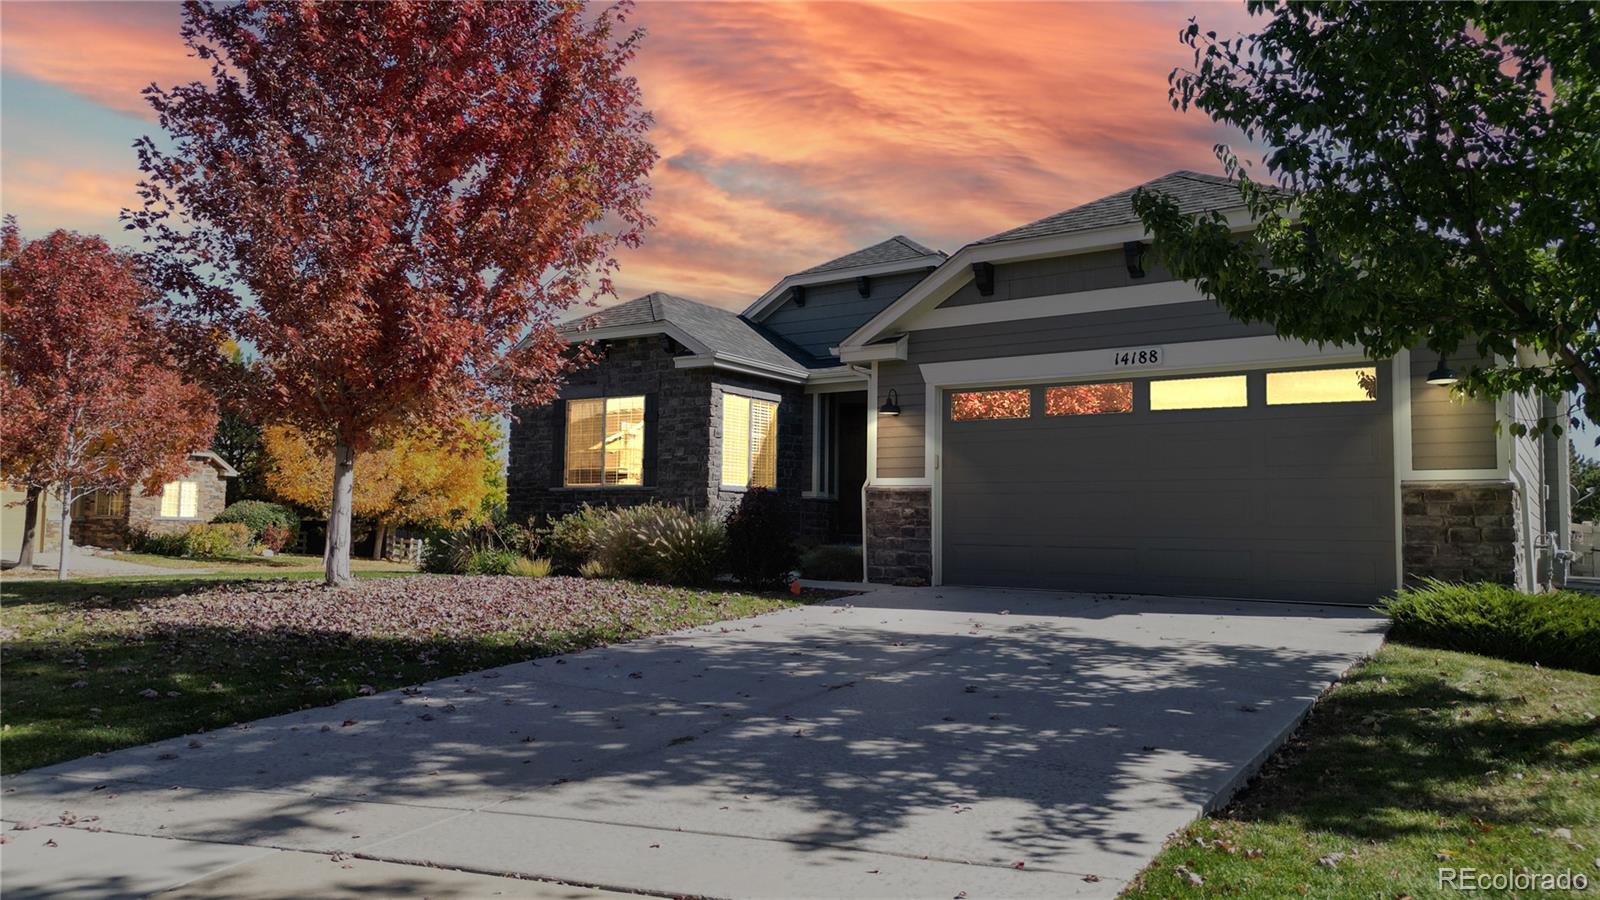 14188  davies way, broomfield sold home. Closed on 2024-02-06 for $782,000.